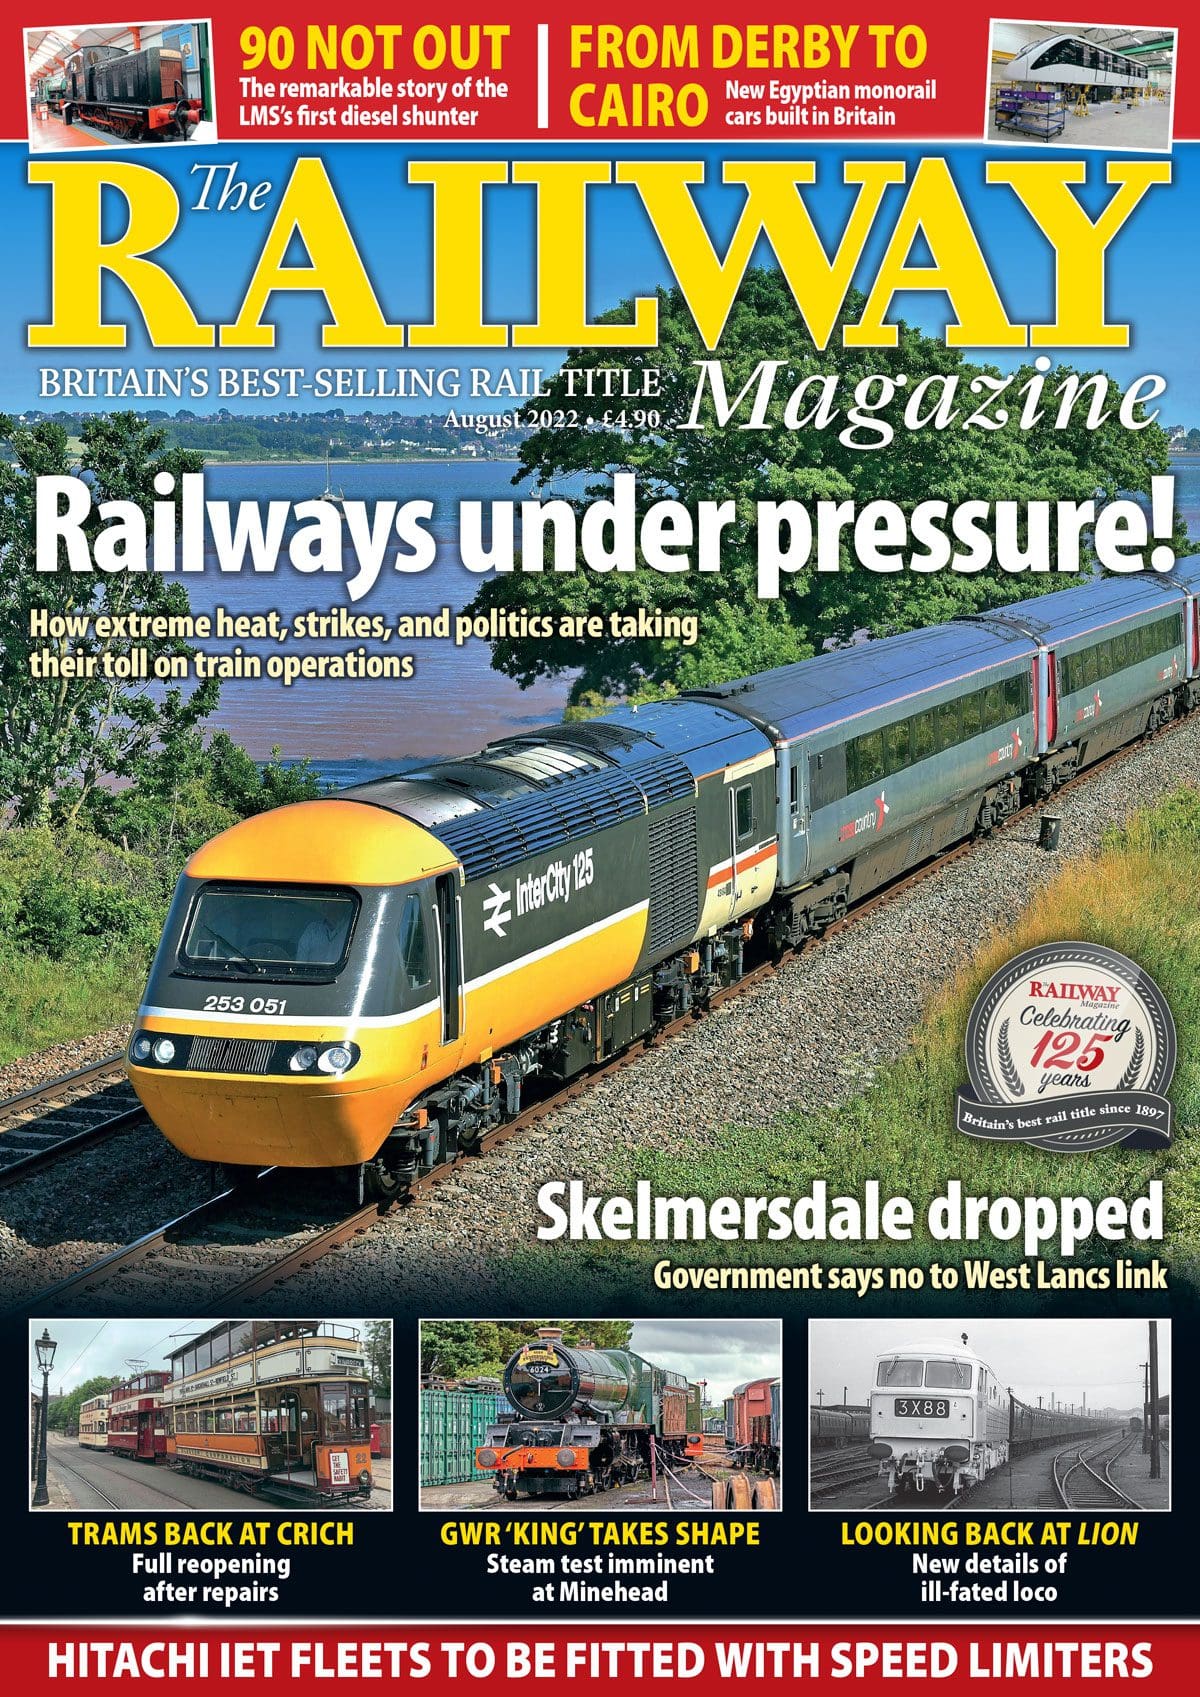 The Railway Magazine August 2022 issue front cover